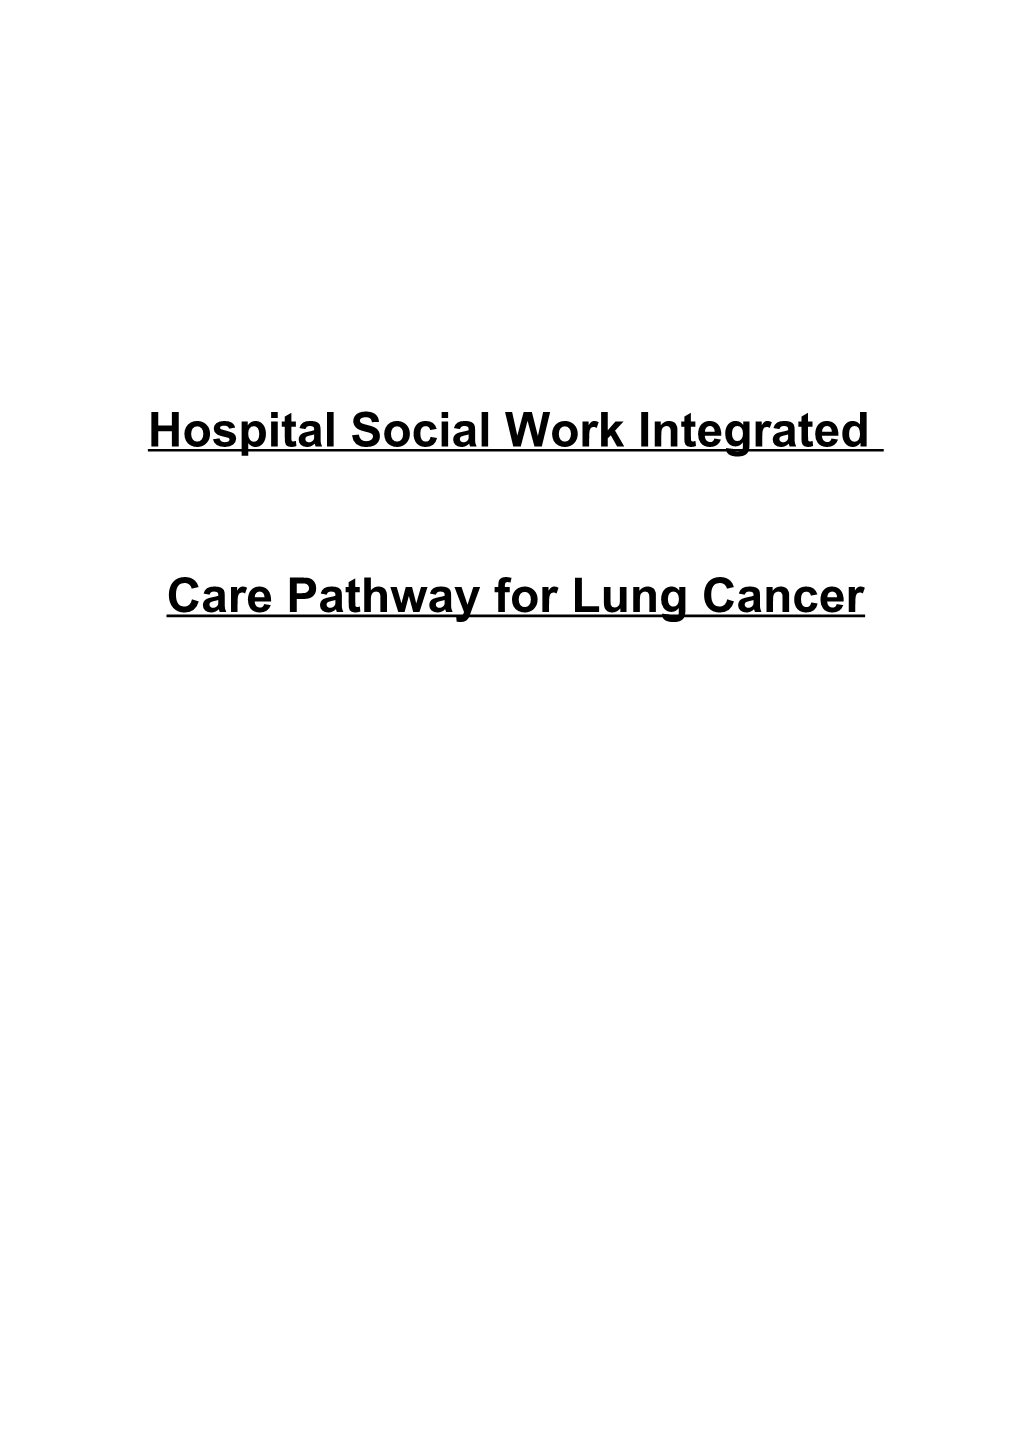 Hospital Social Work Integrated Care Pathway for Lung Cancer